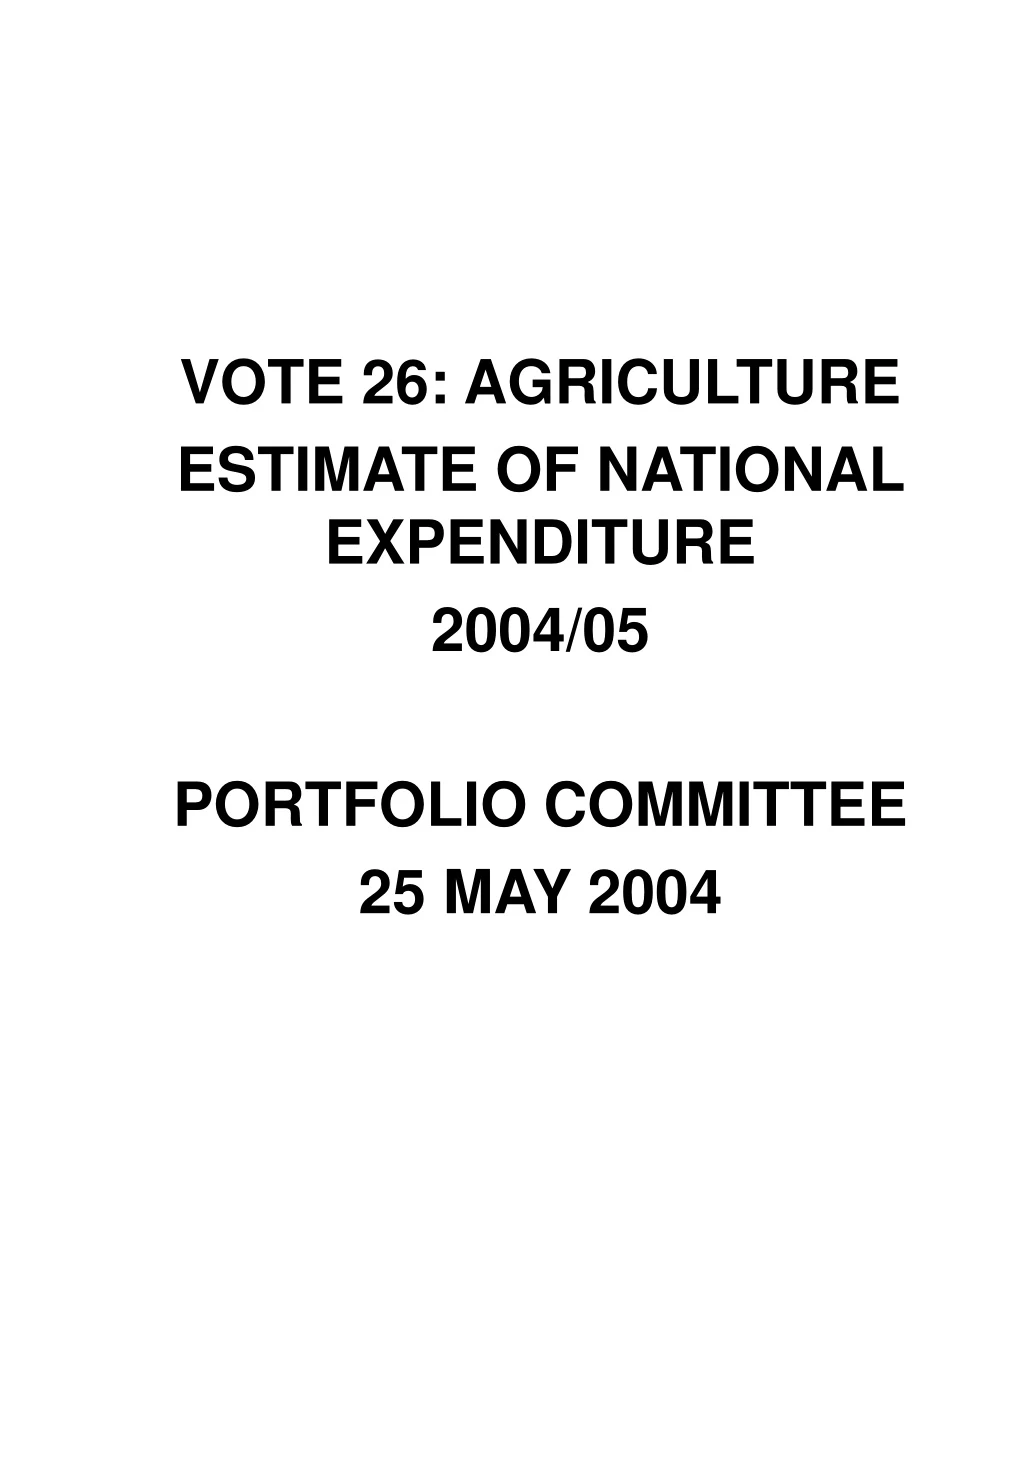 vote 26 agriculture estimate of national expenditure 2004 05 portfolio committee 25 may 2004